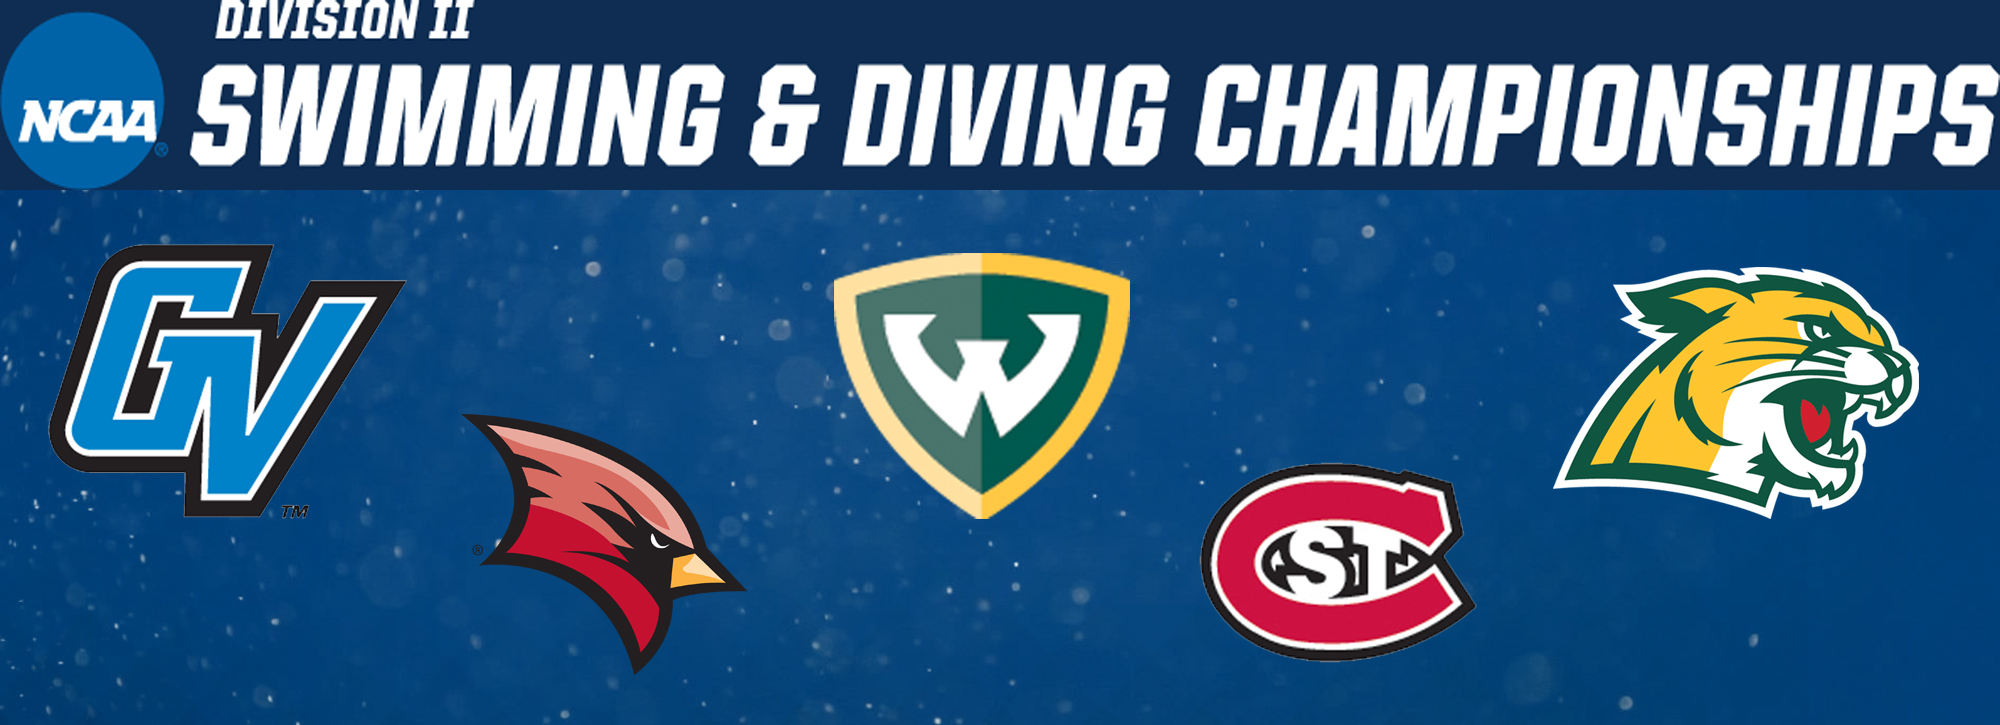 2019 NCAA Swimming & Diving Championships begin today in Indianapolis